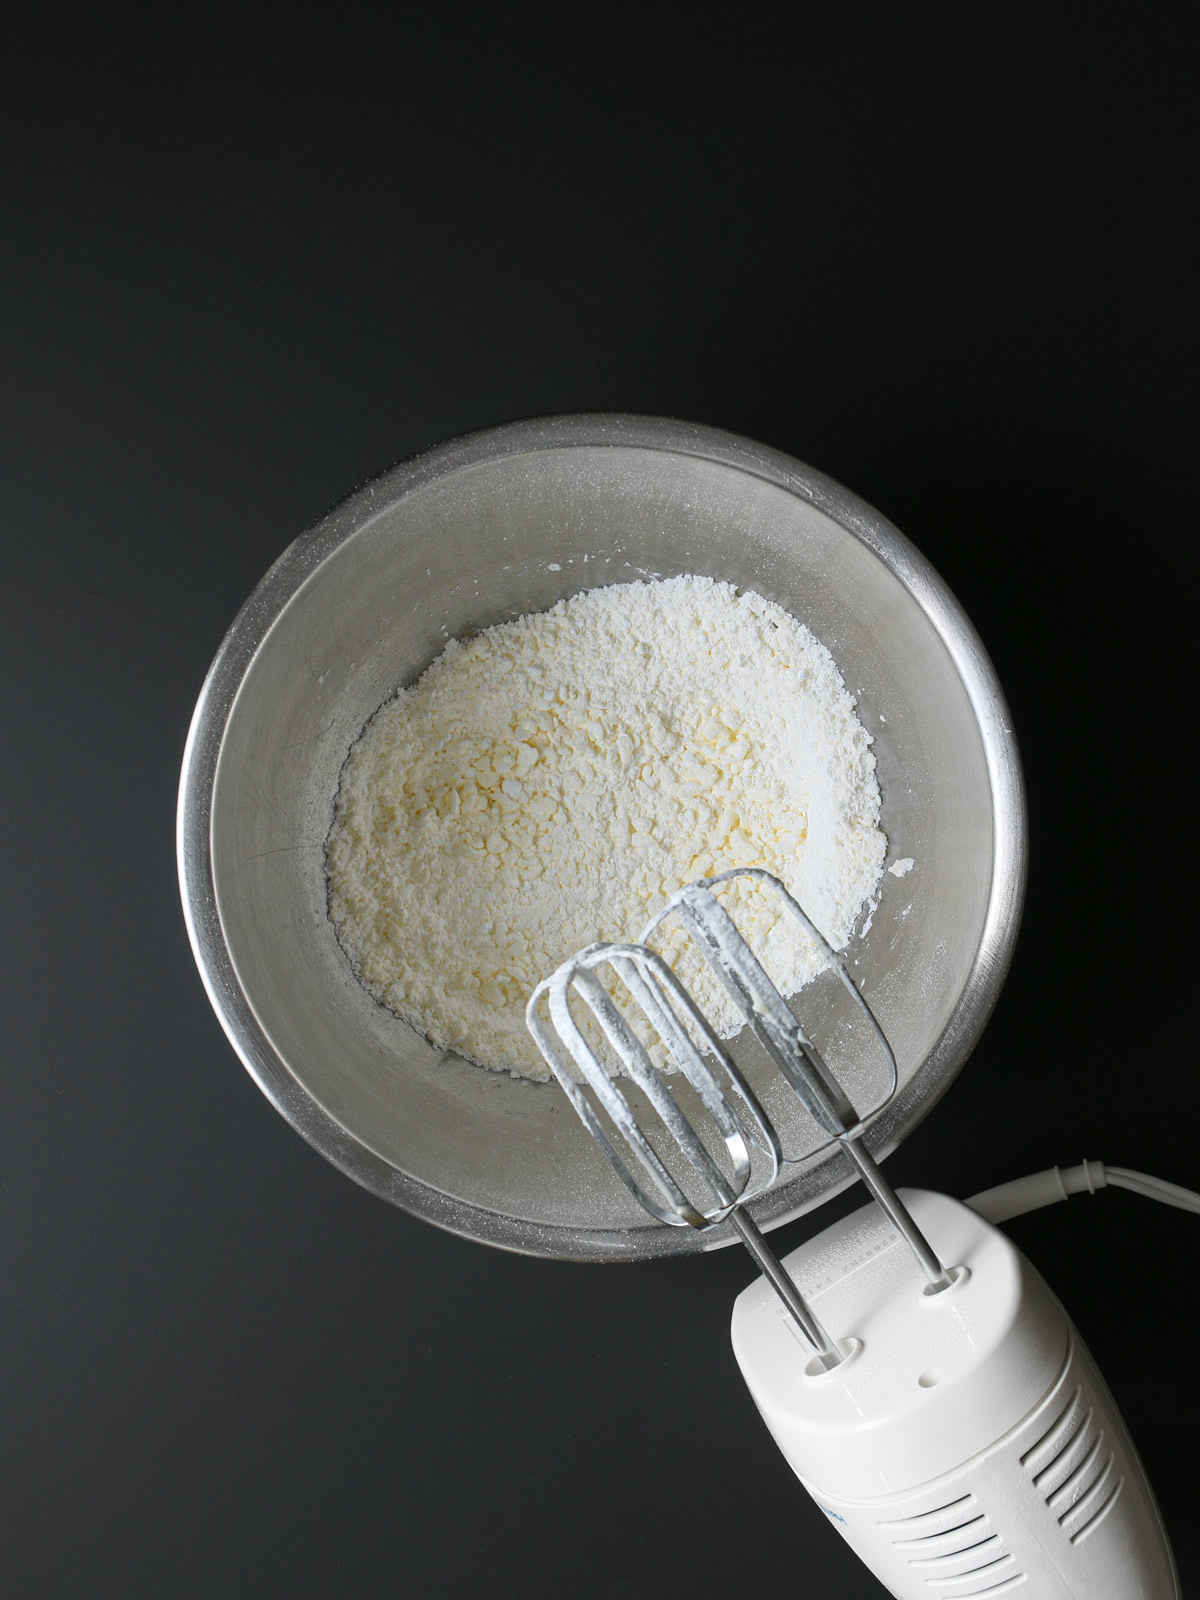 butter creamed into sugar with mixer.